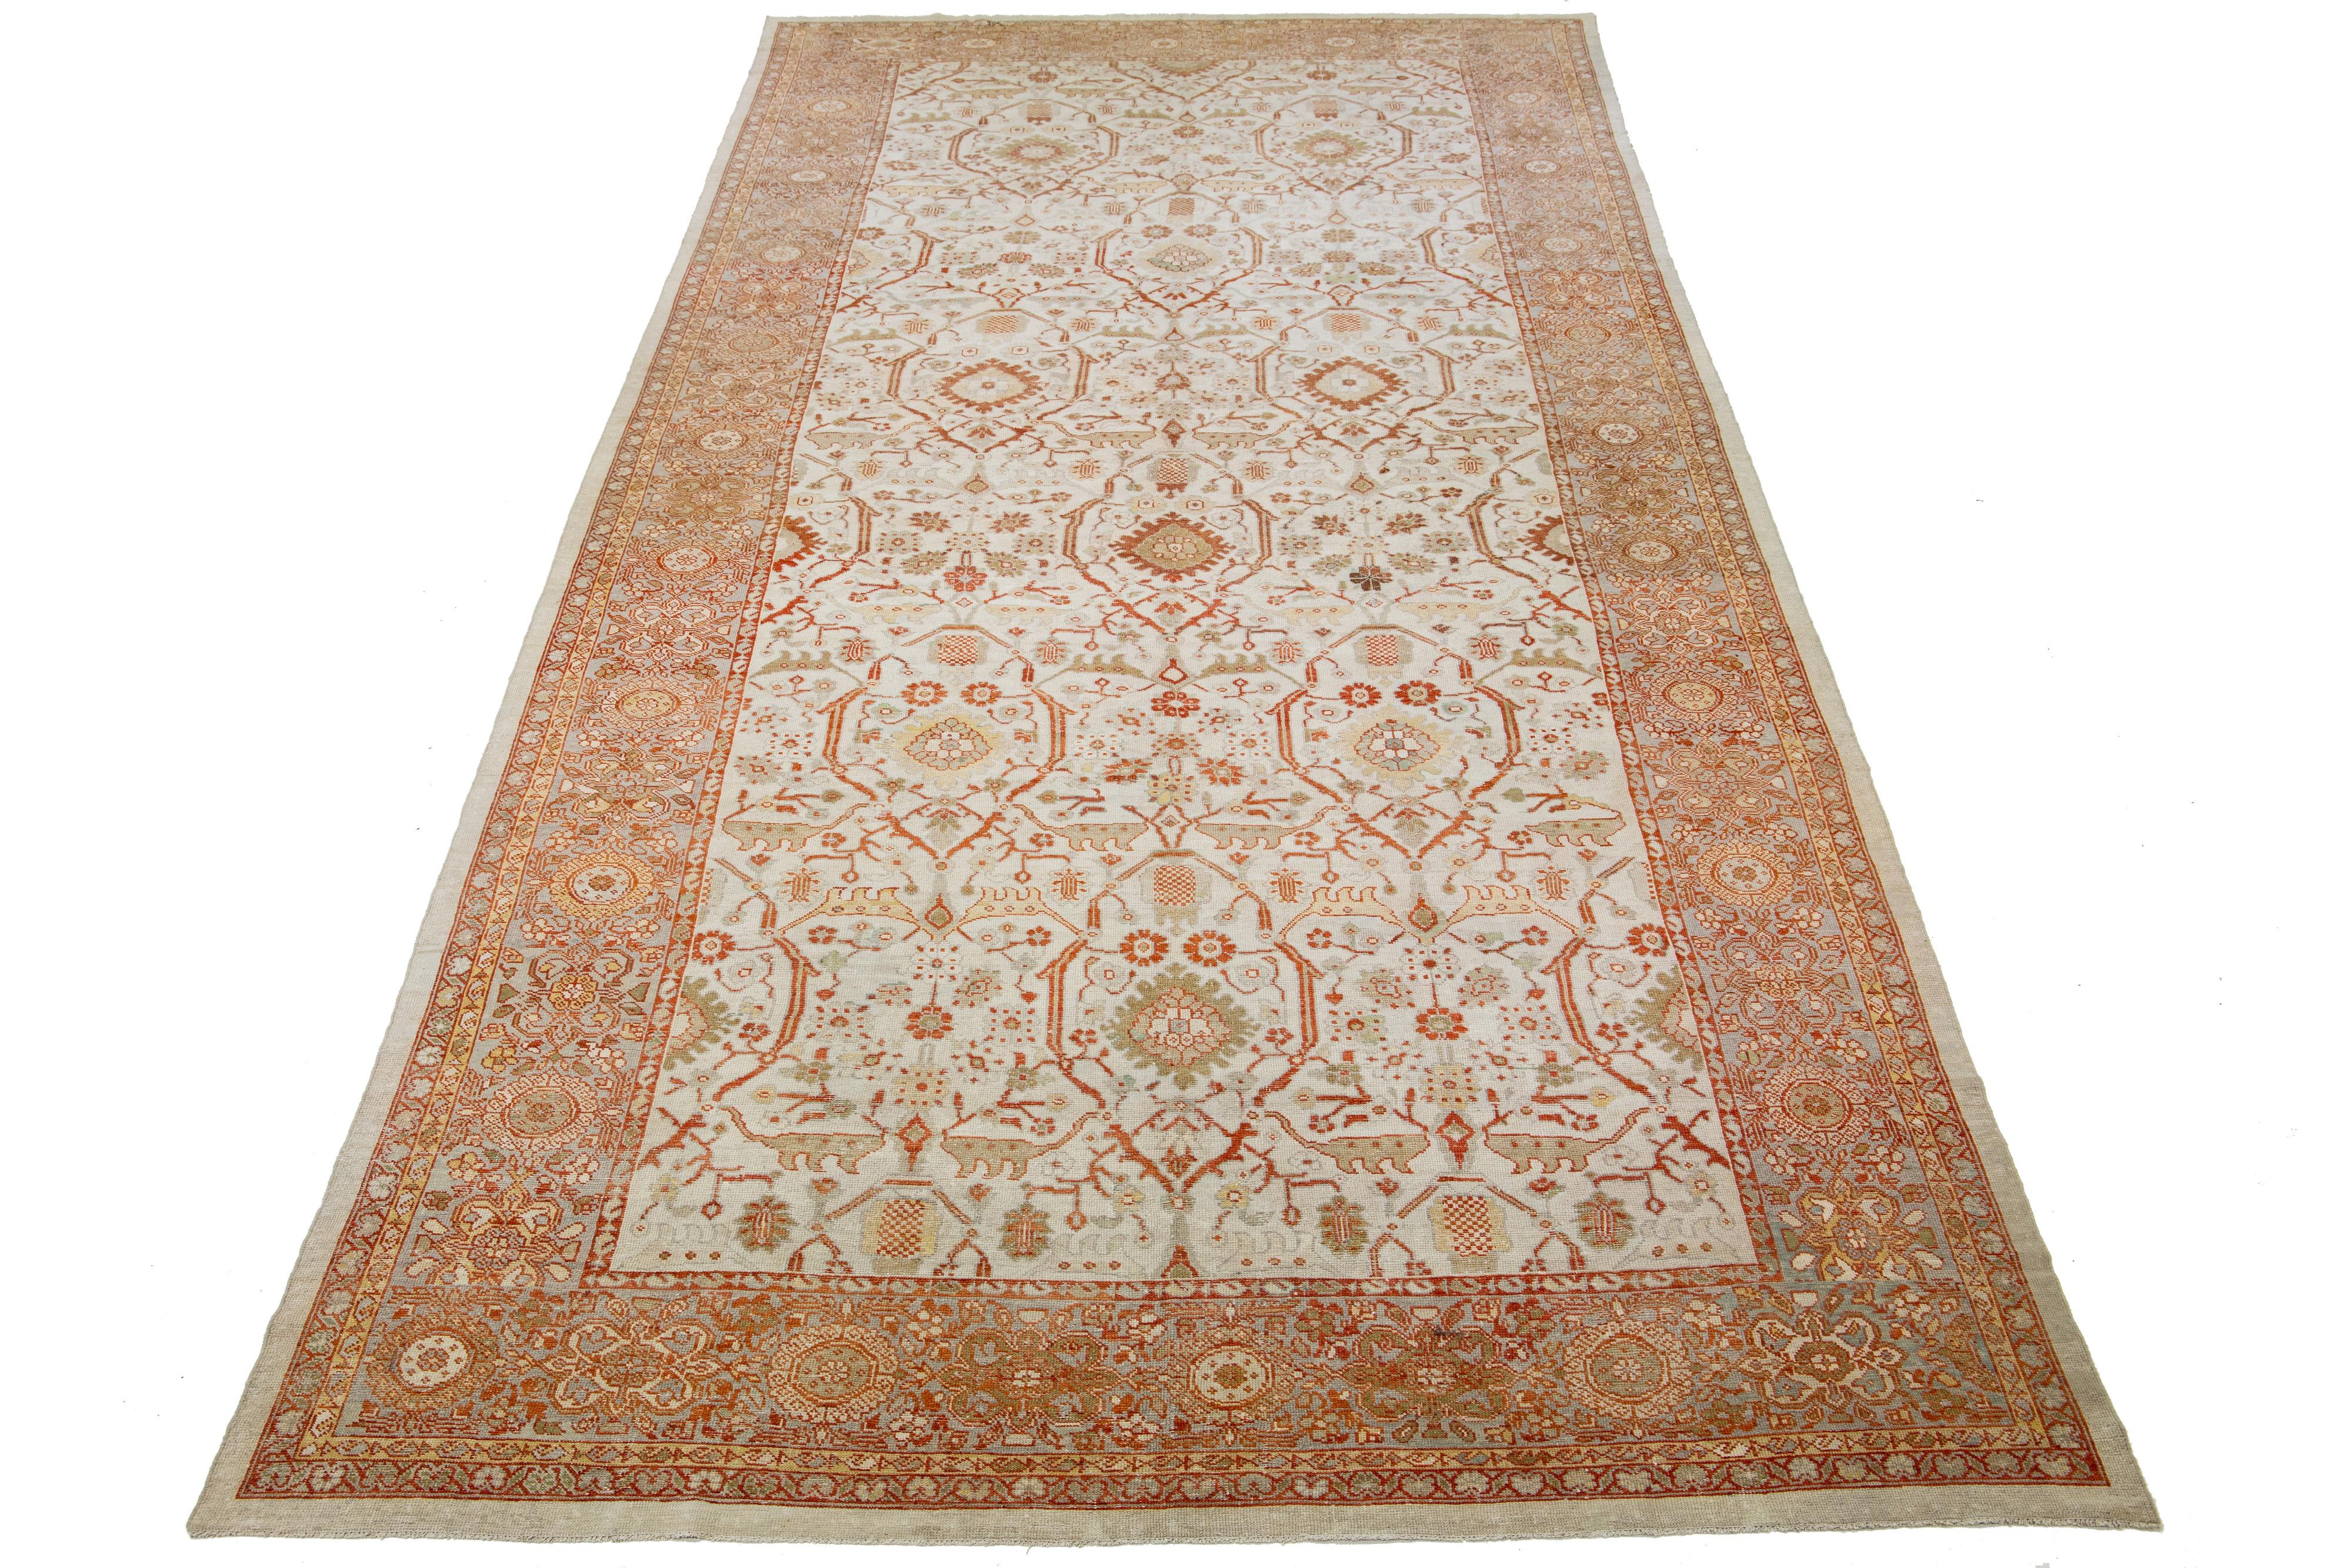 Beautiful antique Persian hand-knotted wool rug with a beige color field. This piece has a gray frame with orange and green accents in a gorgeous all-over floral design.

This rug measures 9'8